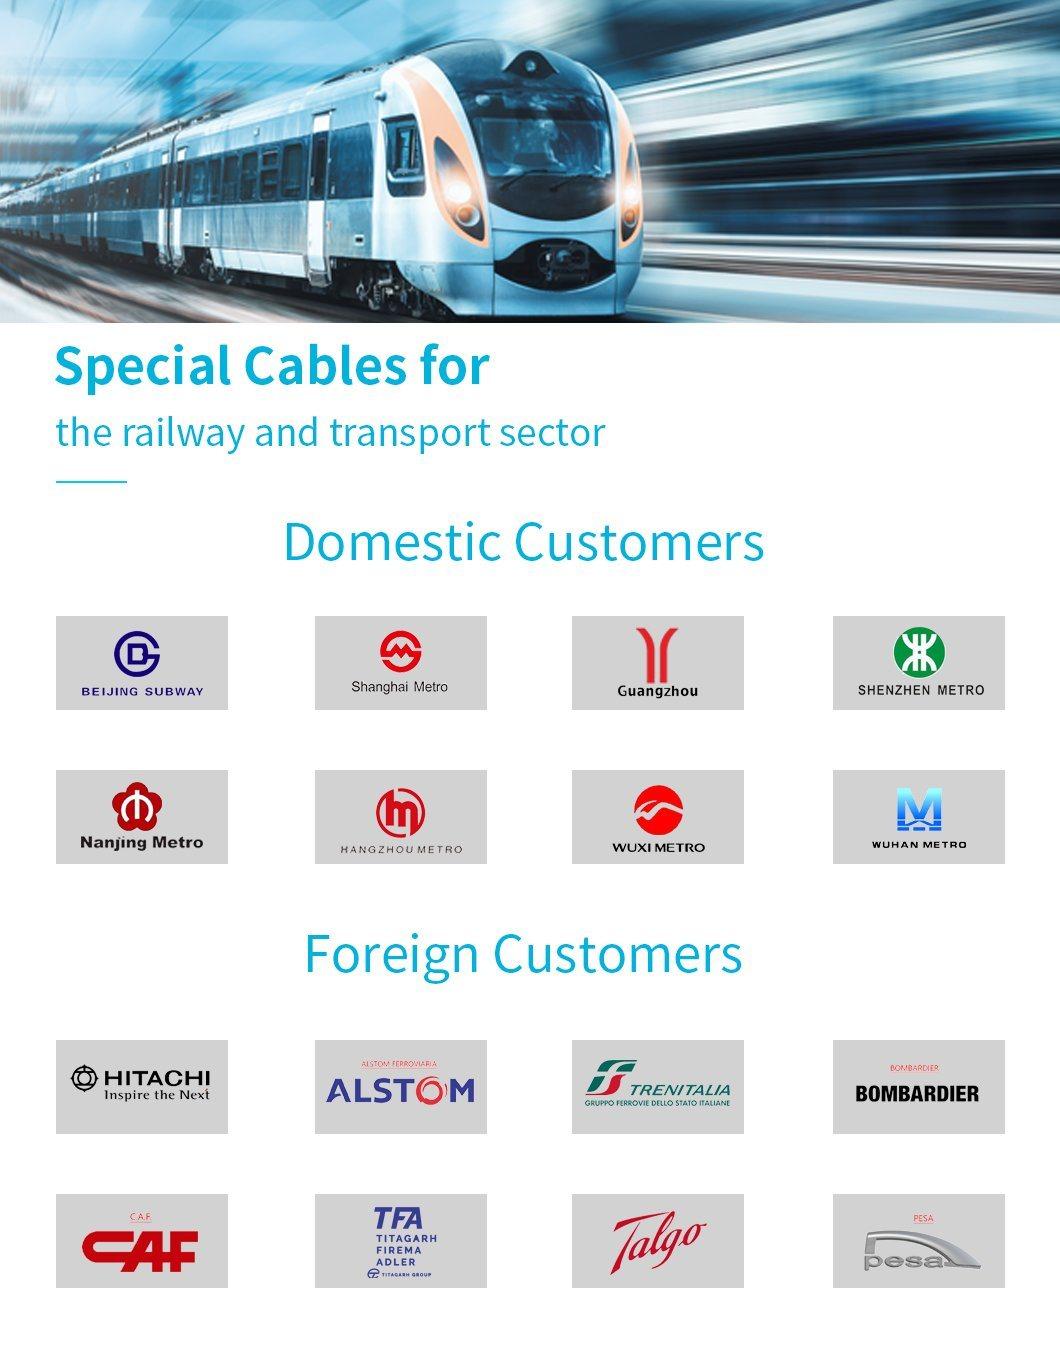 Tinned Copper Wire Communication Cable of High-Speed Data Transmission for Rail